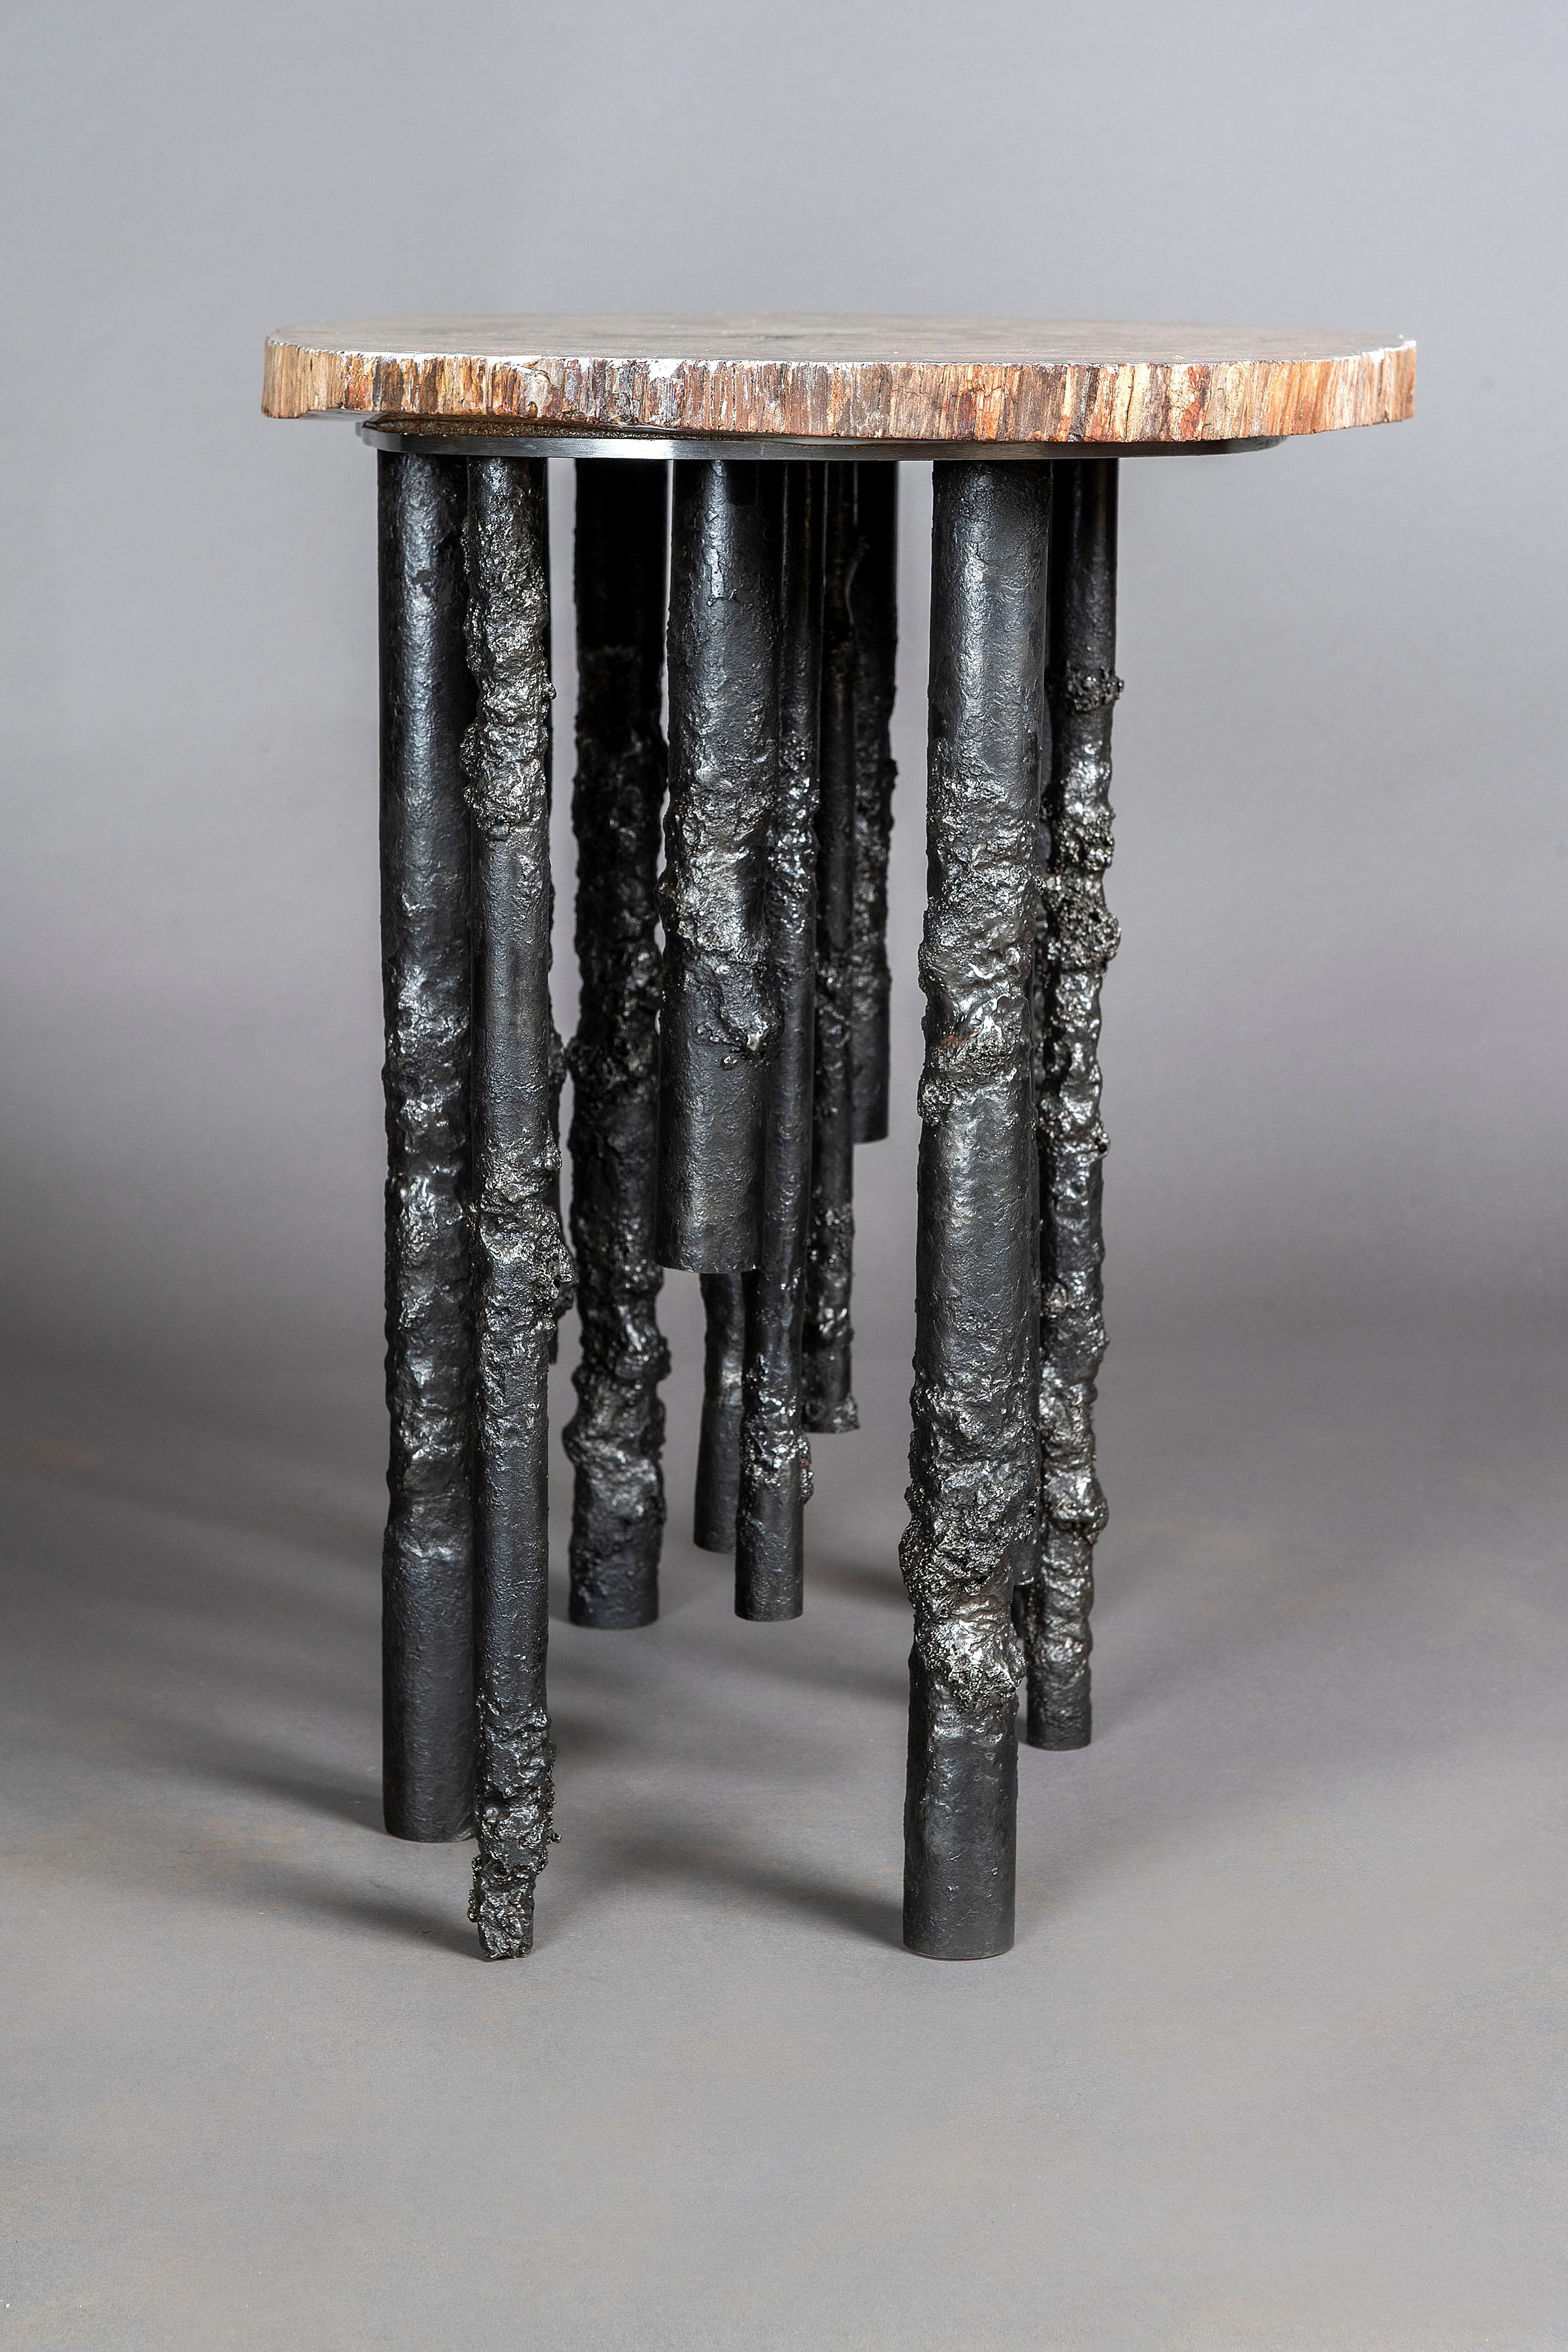 This one of a kind petrified wood and iron table is a sculptural original. The iron legs resemble trees in a forest and the slab top was cut from 200 million year old Arizona tree. Each leg is unique and although handmade, they resemble an organic